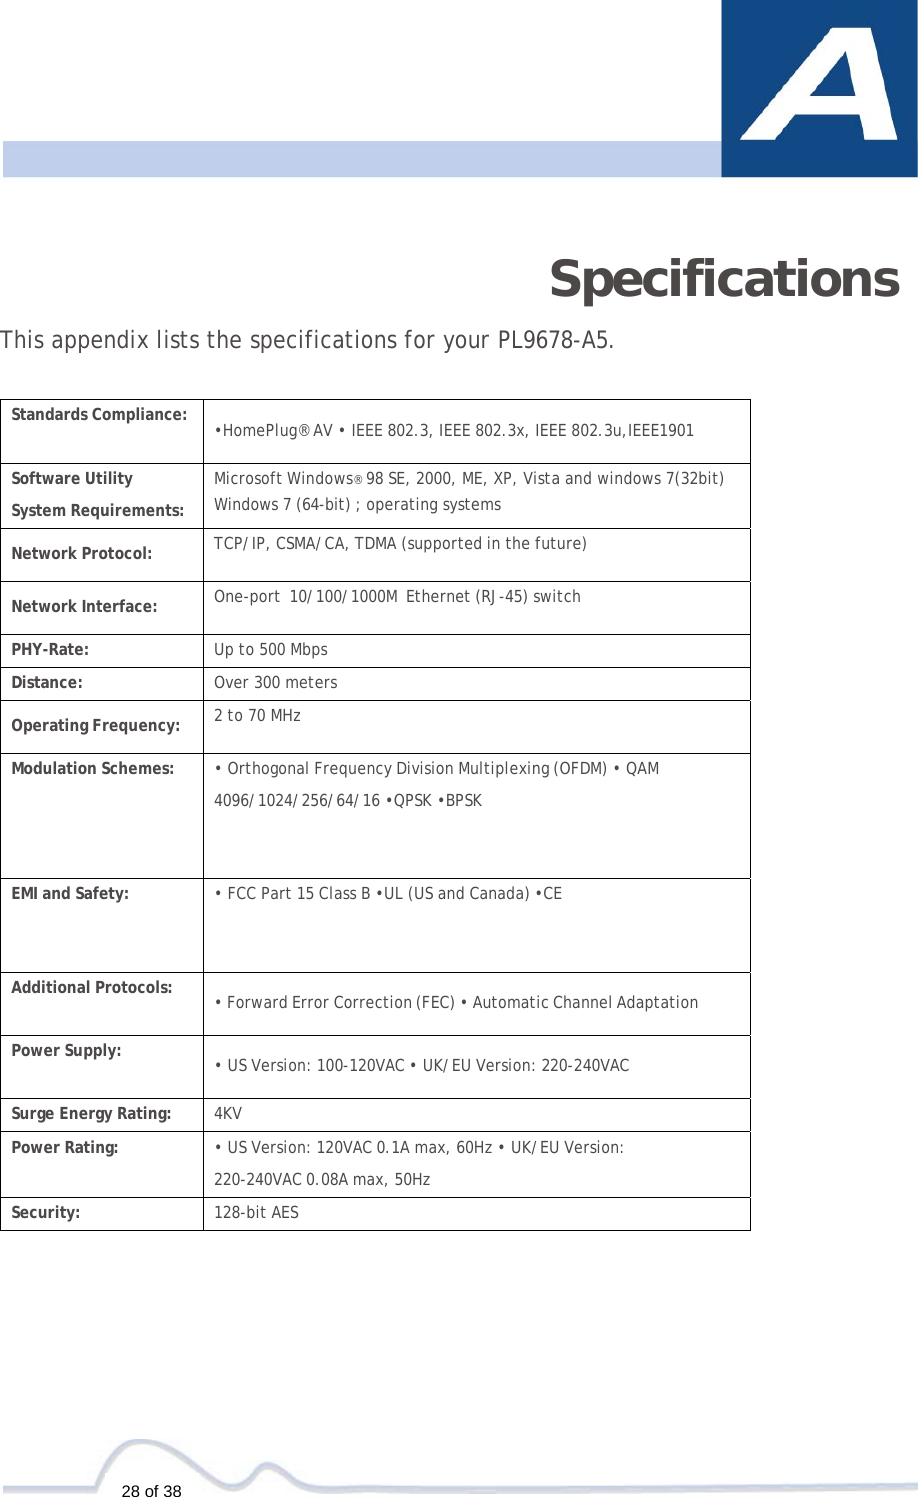    28 of 38           Specifications  This appendix lists the specifications for your PL9678-A5.   Standards Compliance: •HomePlug® AV • IEEE 802.3, IEEE 802.3x, IEEE 802.3u,IEEE1901 Software Utility  System Requirements: Microsoft Windows® 98 SE, 2000, ME, XP, Vista and windows 7(32bit)  Windows 7 (64-bit) ; operating systems  Network Protocol: TCP/IP, CSMA/CA, TDMA (supported in the future) Network Interface: One-port  10/100/1000M  Ethernet (RJ-45) switchPHY-Rate:  Up to 500 Mbps Distance: Over 300 meters Operating Frequency: 2 to 70 MHz Modulation Schemes: • Orthogonal Frequency Division Multiplexing (OFDM) • QAM  4096/1024/256/64/16 •QPSK •BPSK EMI and Safety: • FCC Part 15 Class B •UL (US and Canada) •CEAdditional Protocols: • Forward Error Correction (FEC) • Automatic Channel Adaptation Power Supply: • US Version: 100-120VAC • UK/EU Version: 220-240VAC Surge Energy Rating: 4KV Power Rating: • US Version: 120VAC 0.1A max, 60Hz • UK/EU Version:  220-240VAC 0.08A max, 50Hz Security: 128-bit AES 